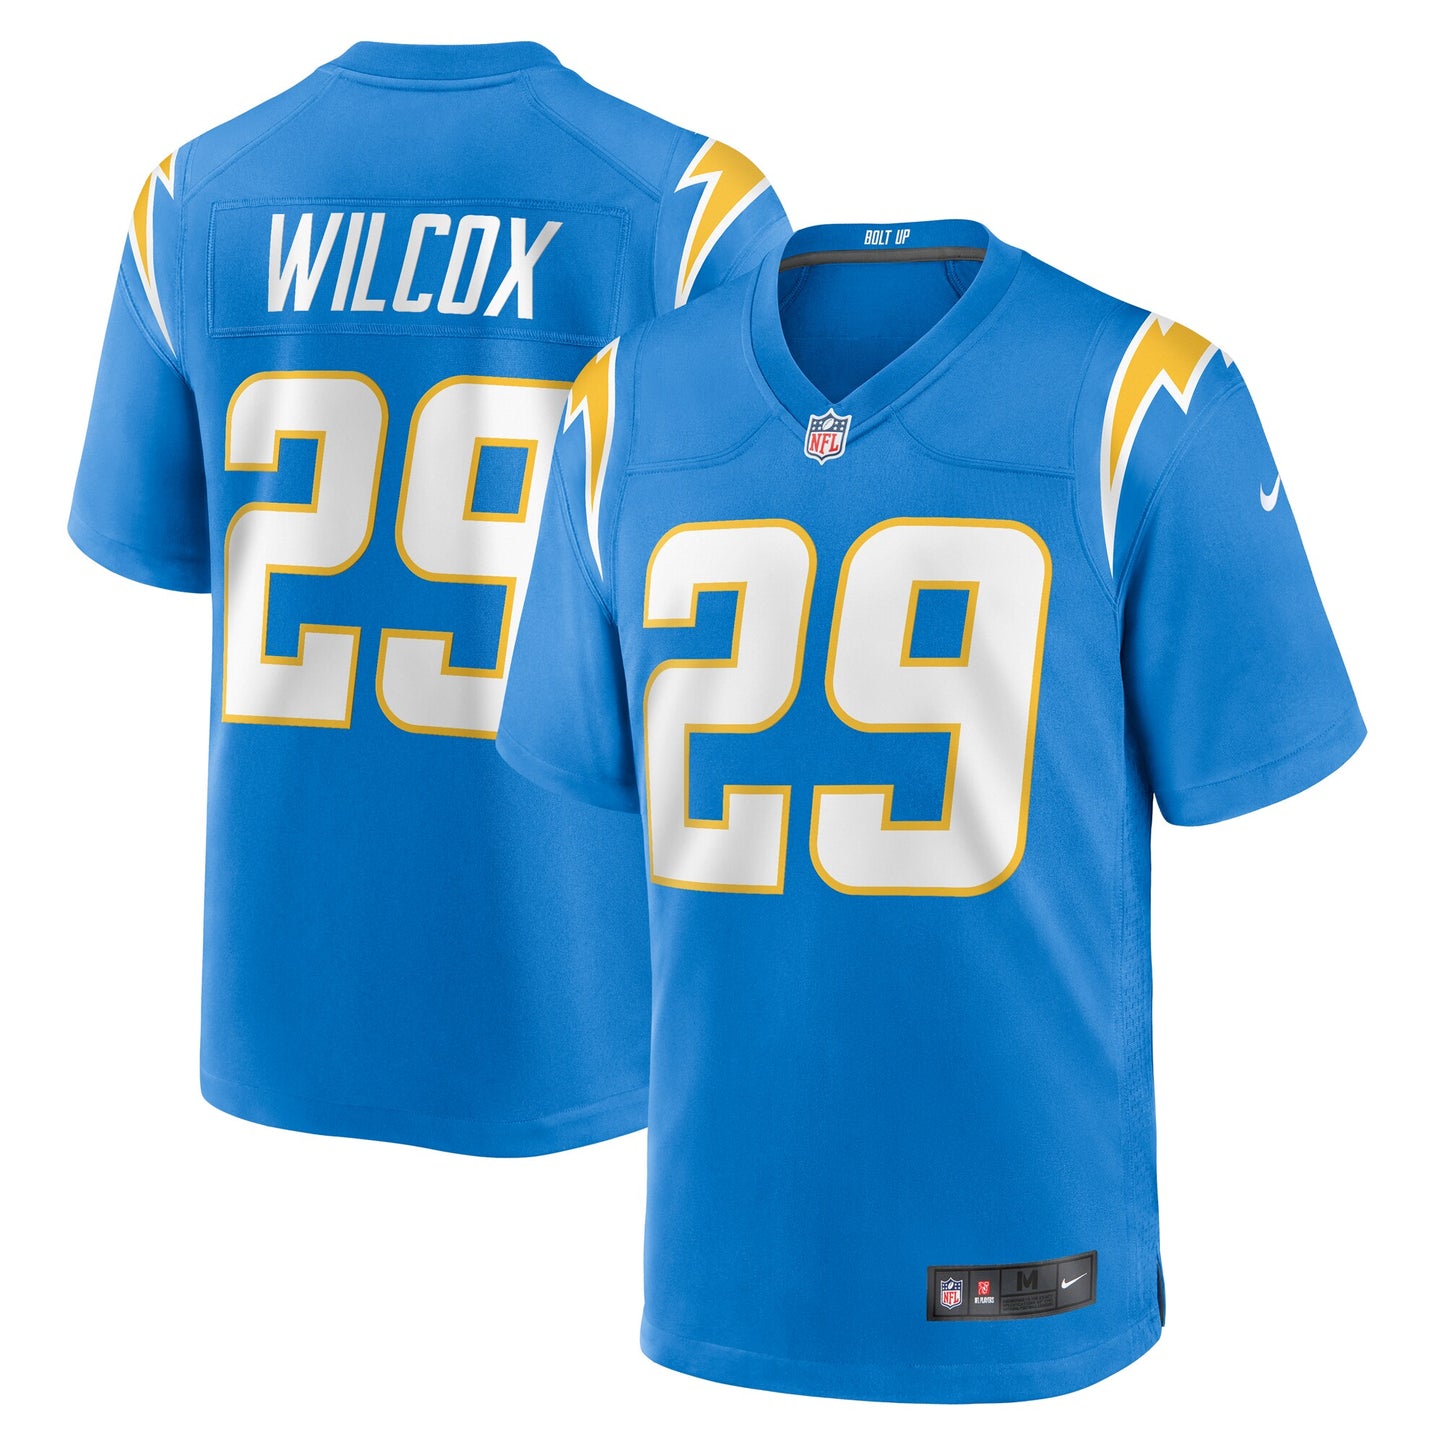 Chris Wilcox Los Angeles Chargers Nike Team Game Jersey - Powder Blue